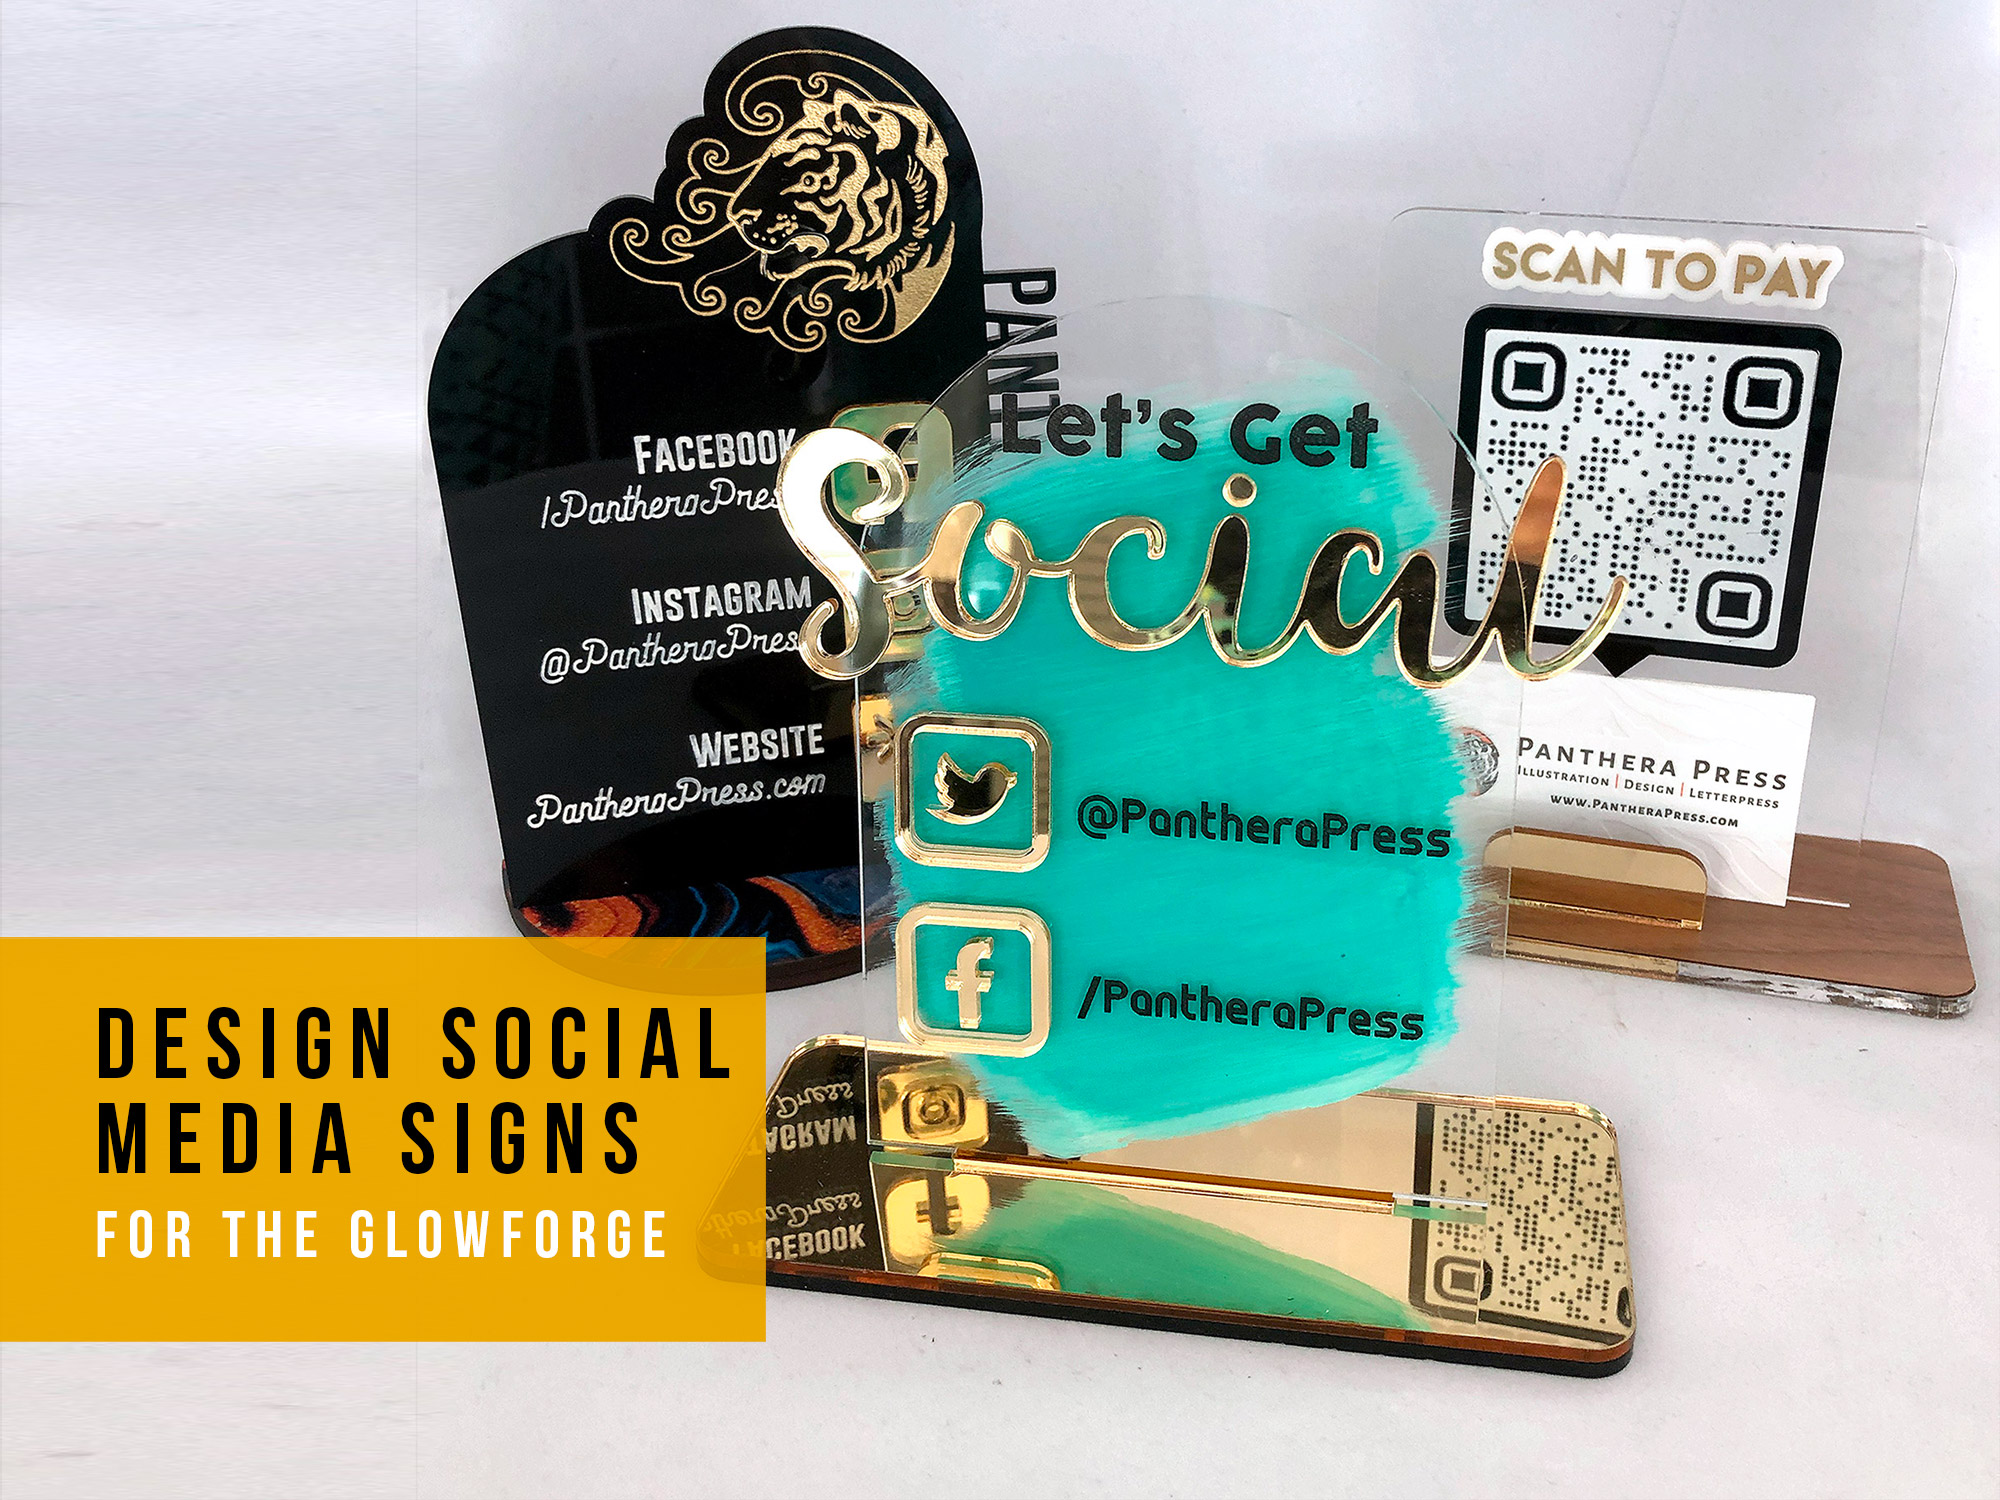 Designing a Social Media Sign for the Glowforge